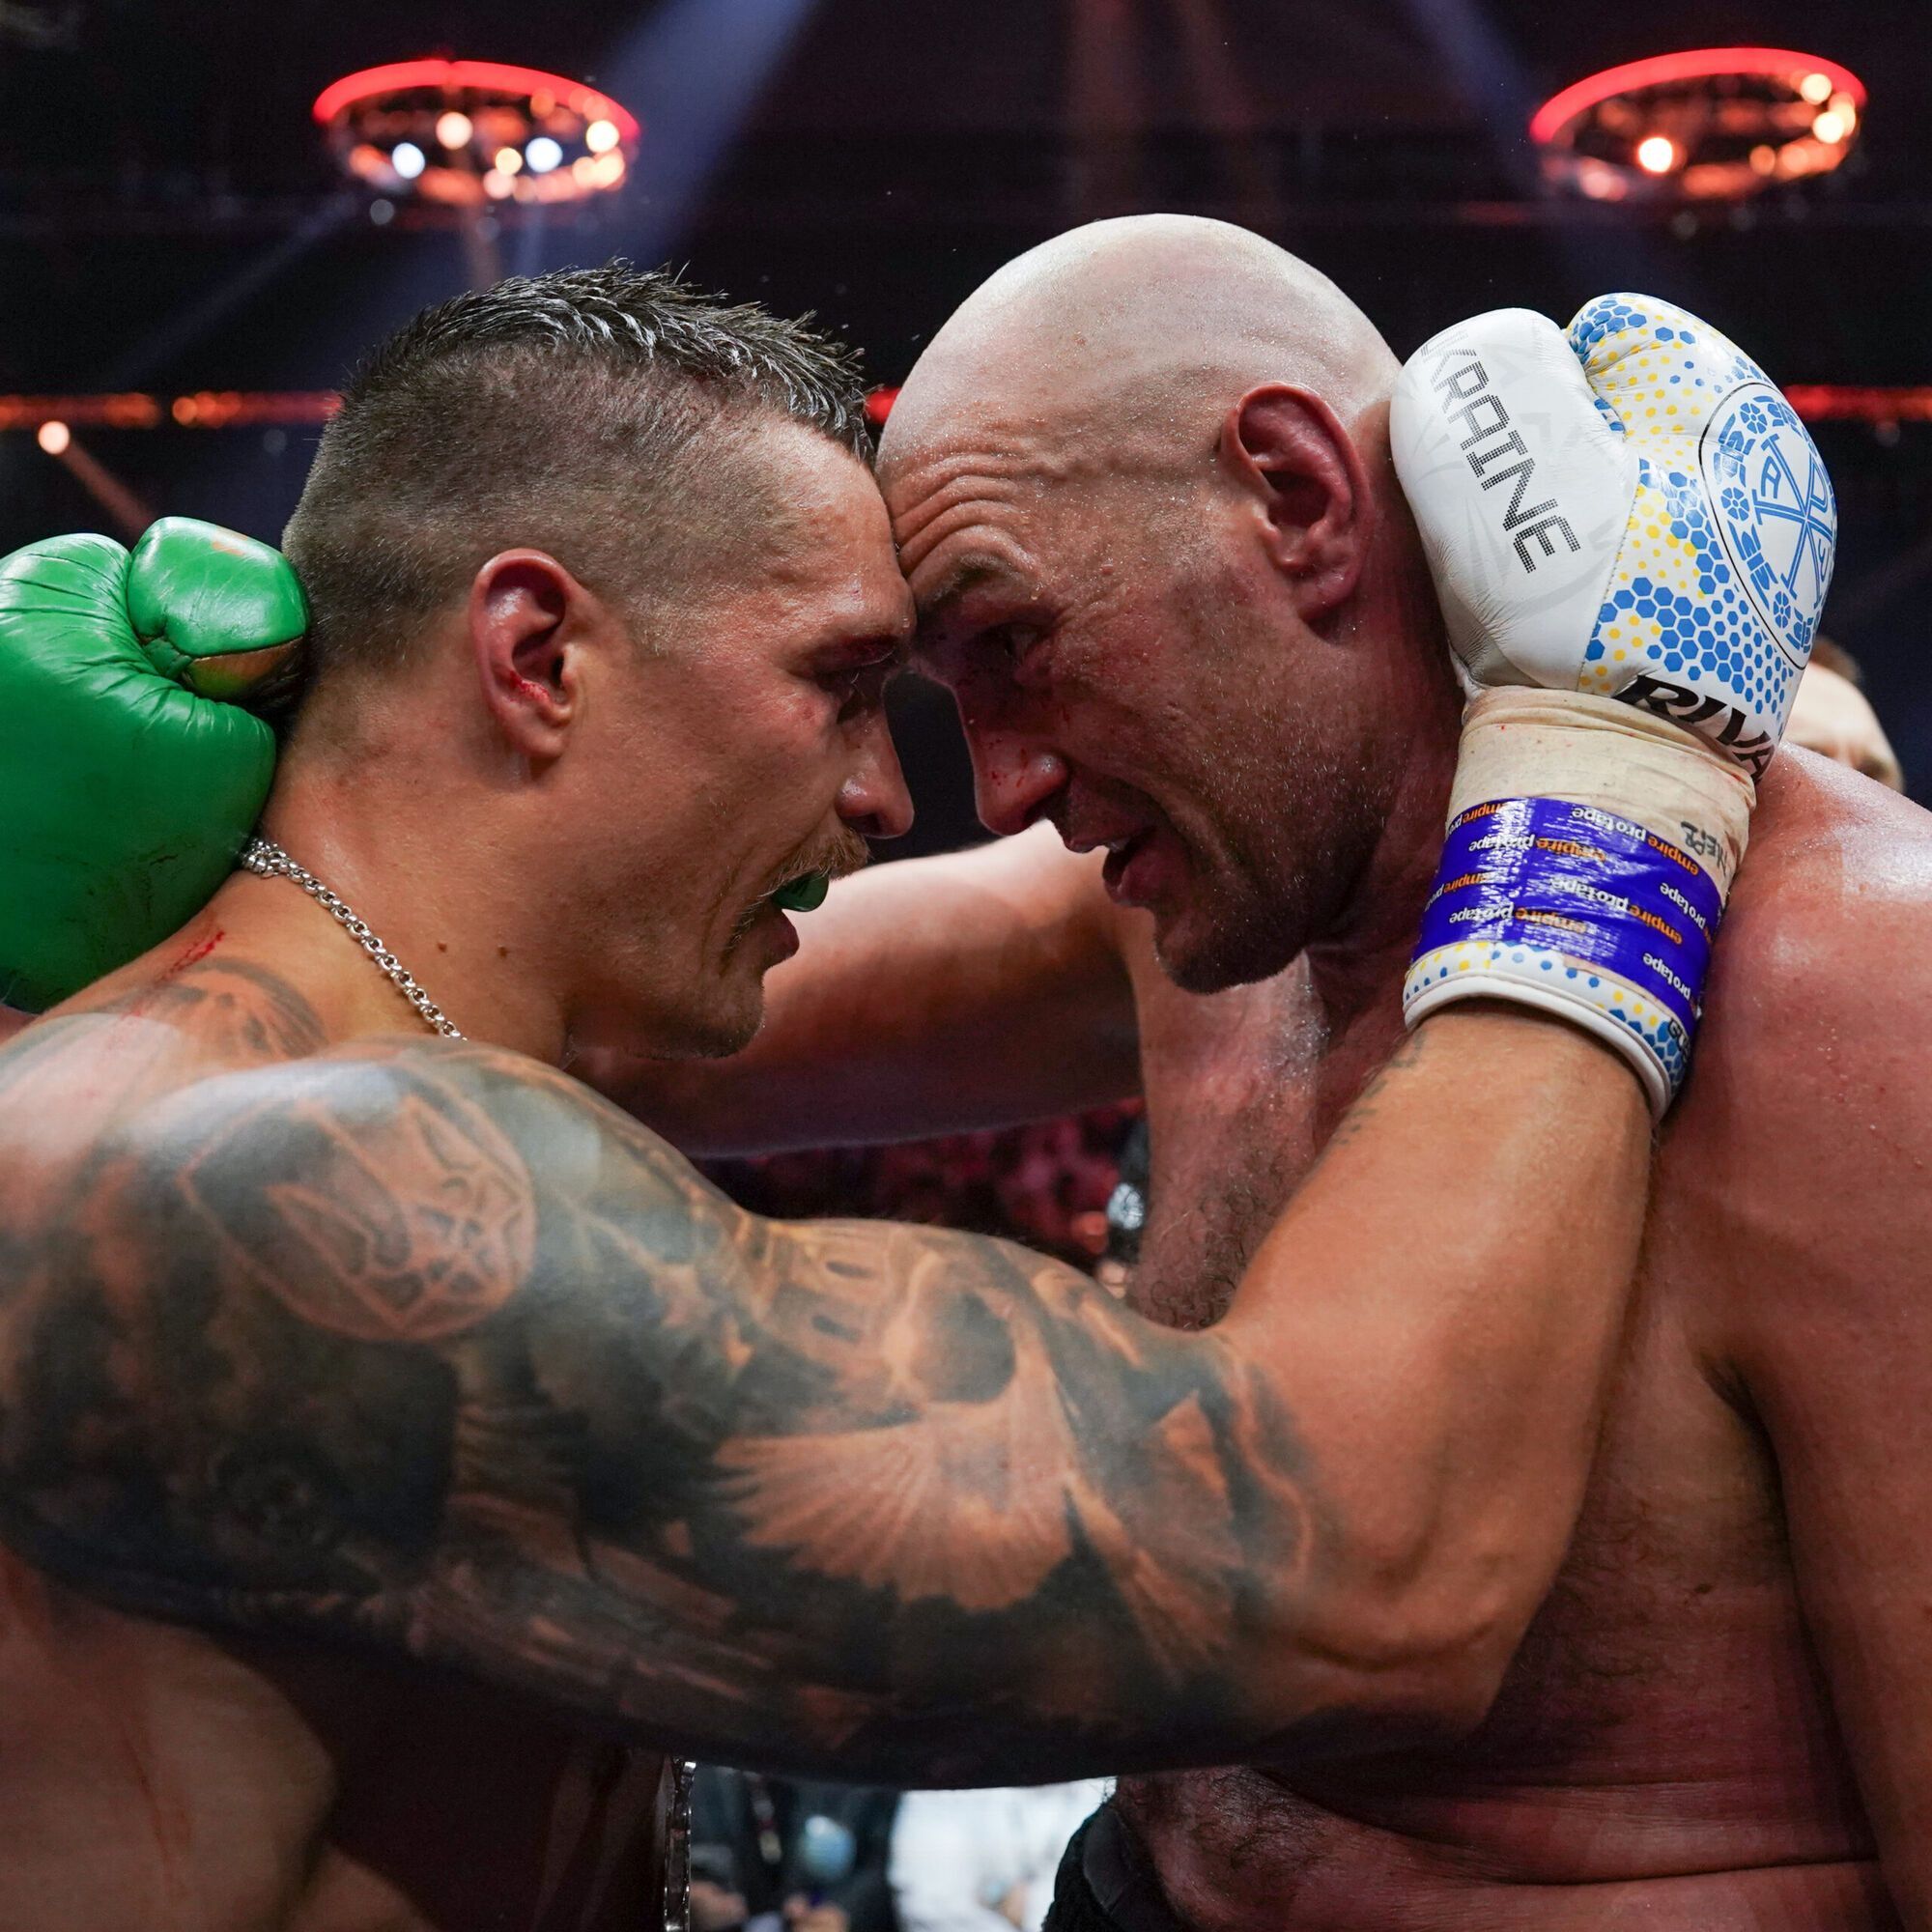 Artificial intelligence has made a prediction for the Usyk-Fury rematch